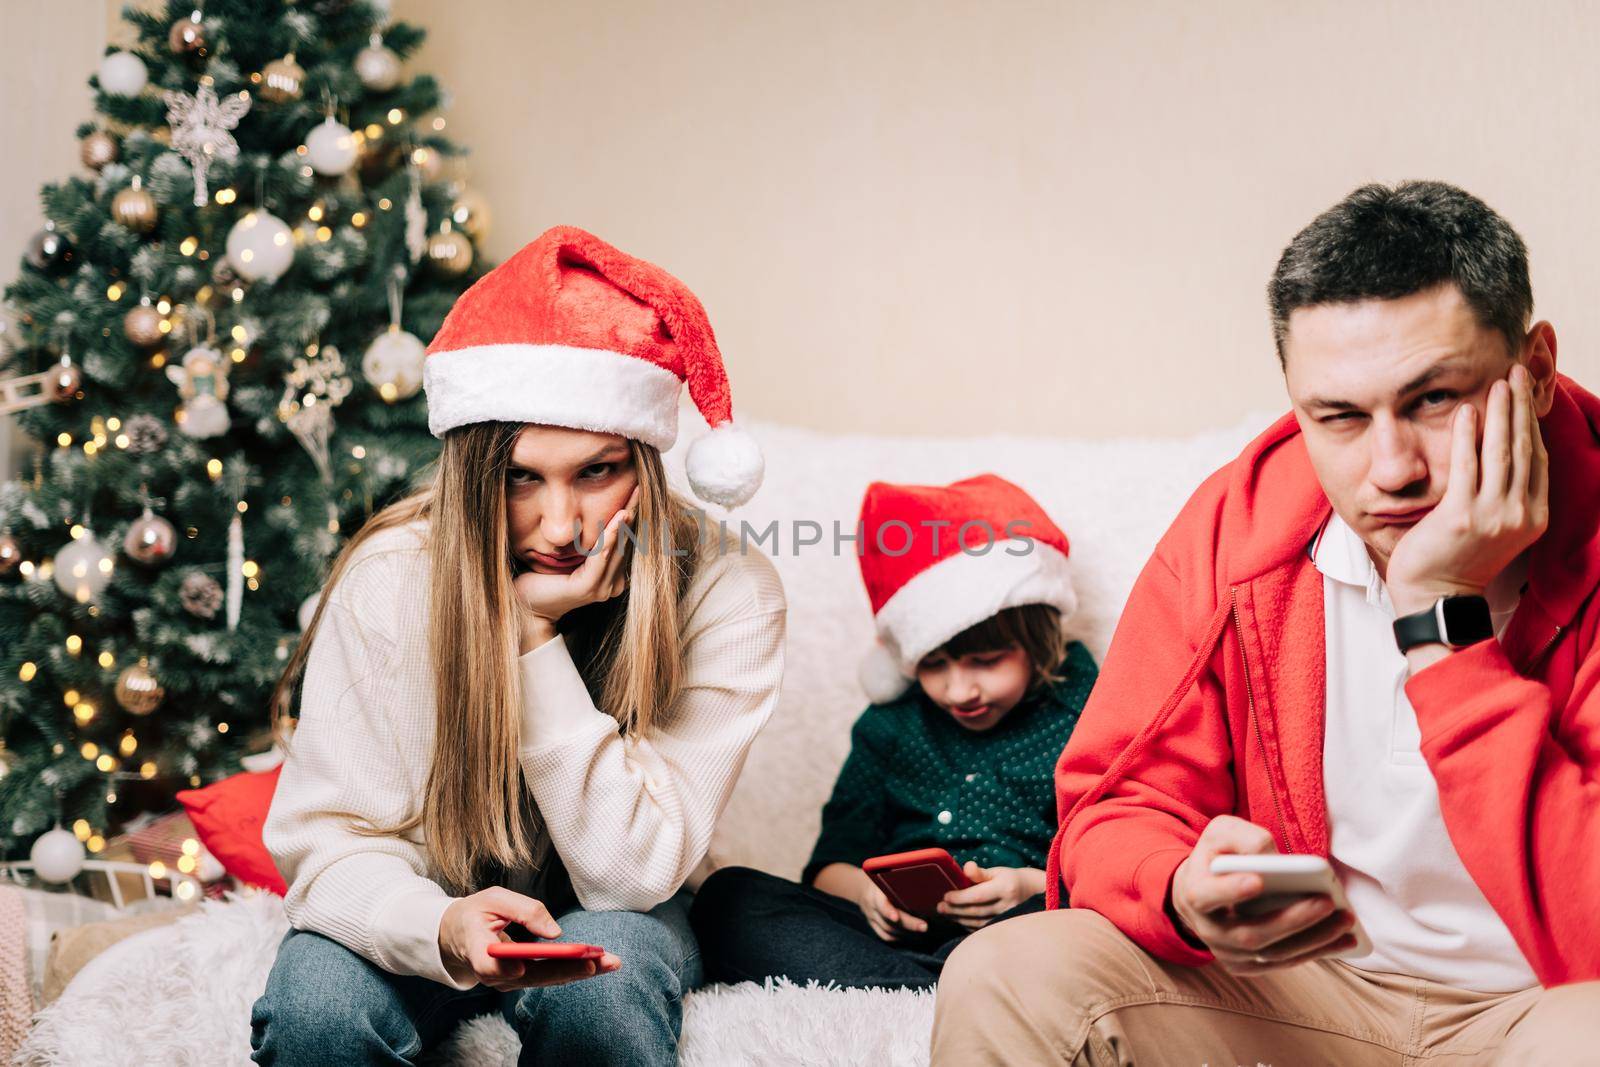 Portrait of depressed family with son playing cell phone during new year party. Tired mom and dad having a stressful time while kid using with mobile phone. Family dispute after Christmas celebration.